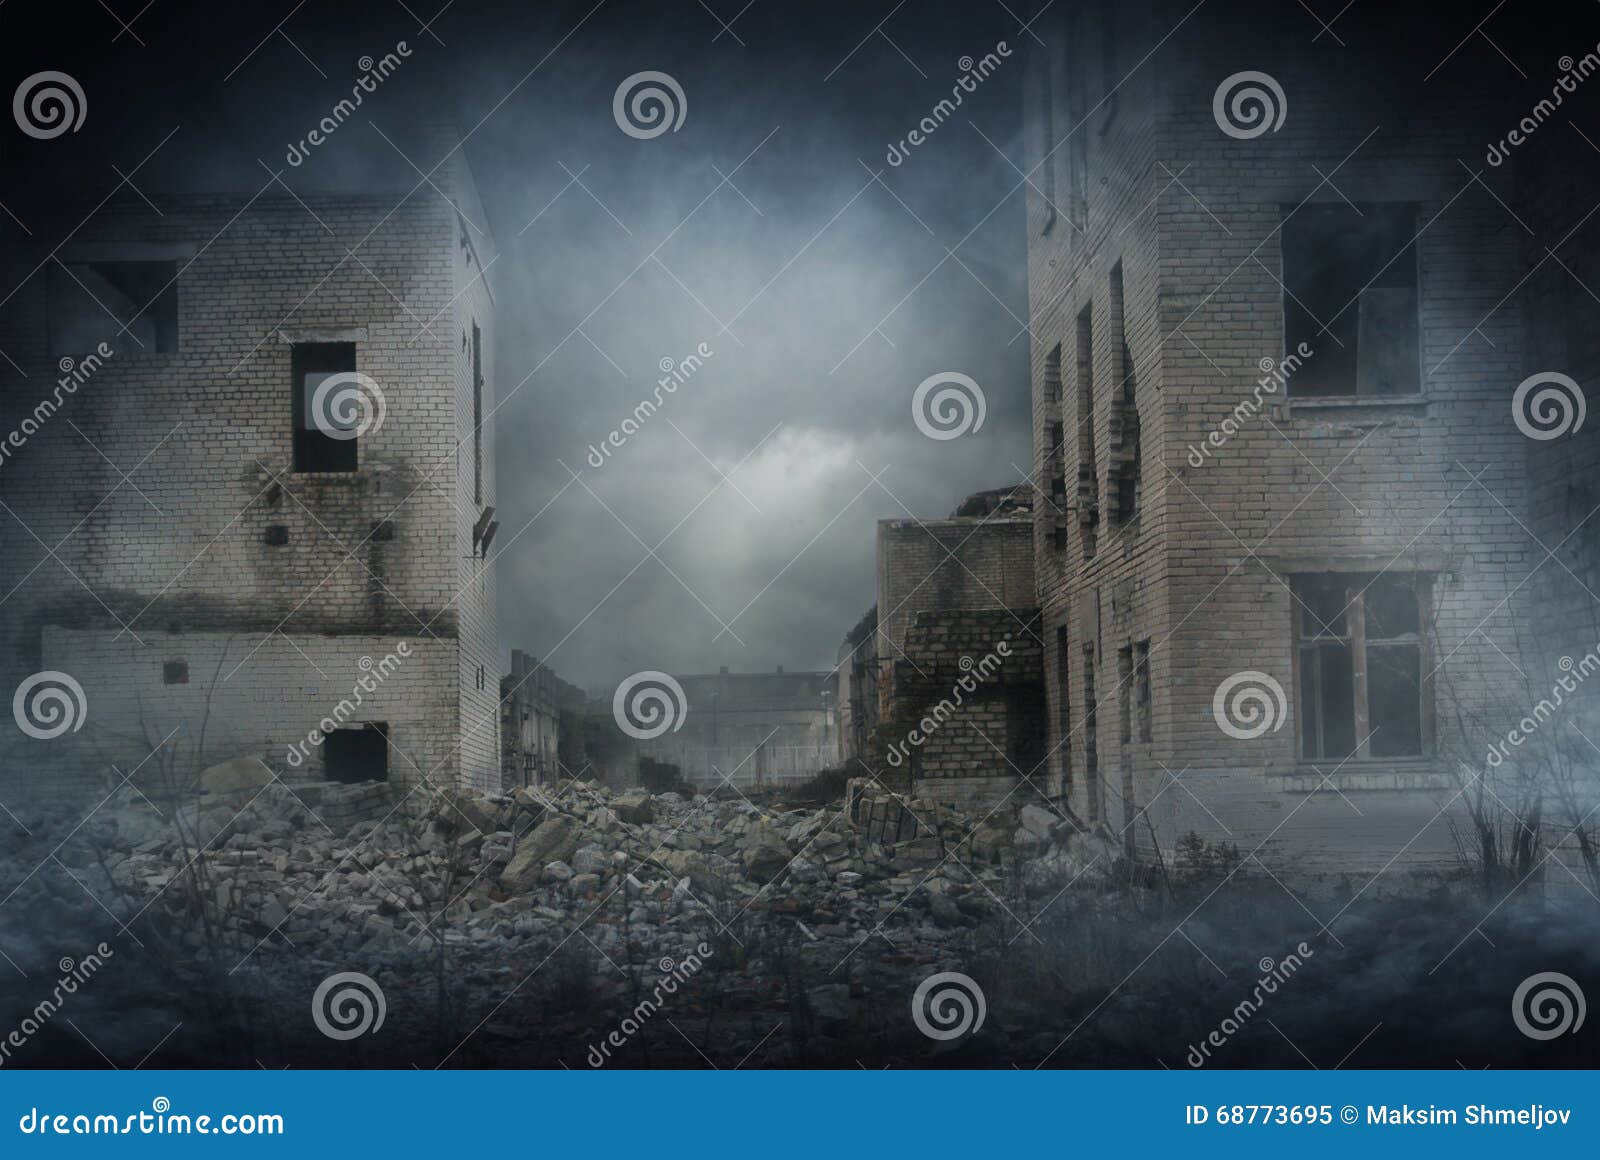 apocalyptic ruins of the city. disaster effect